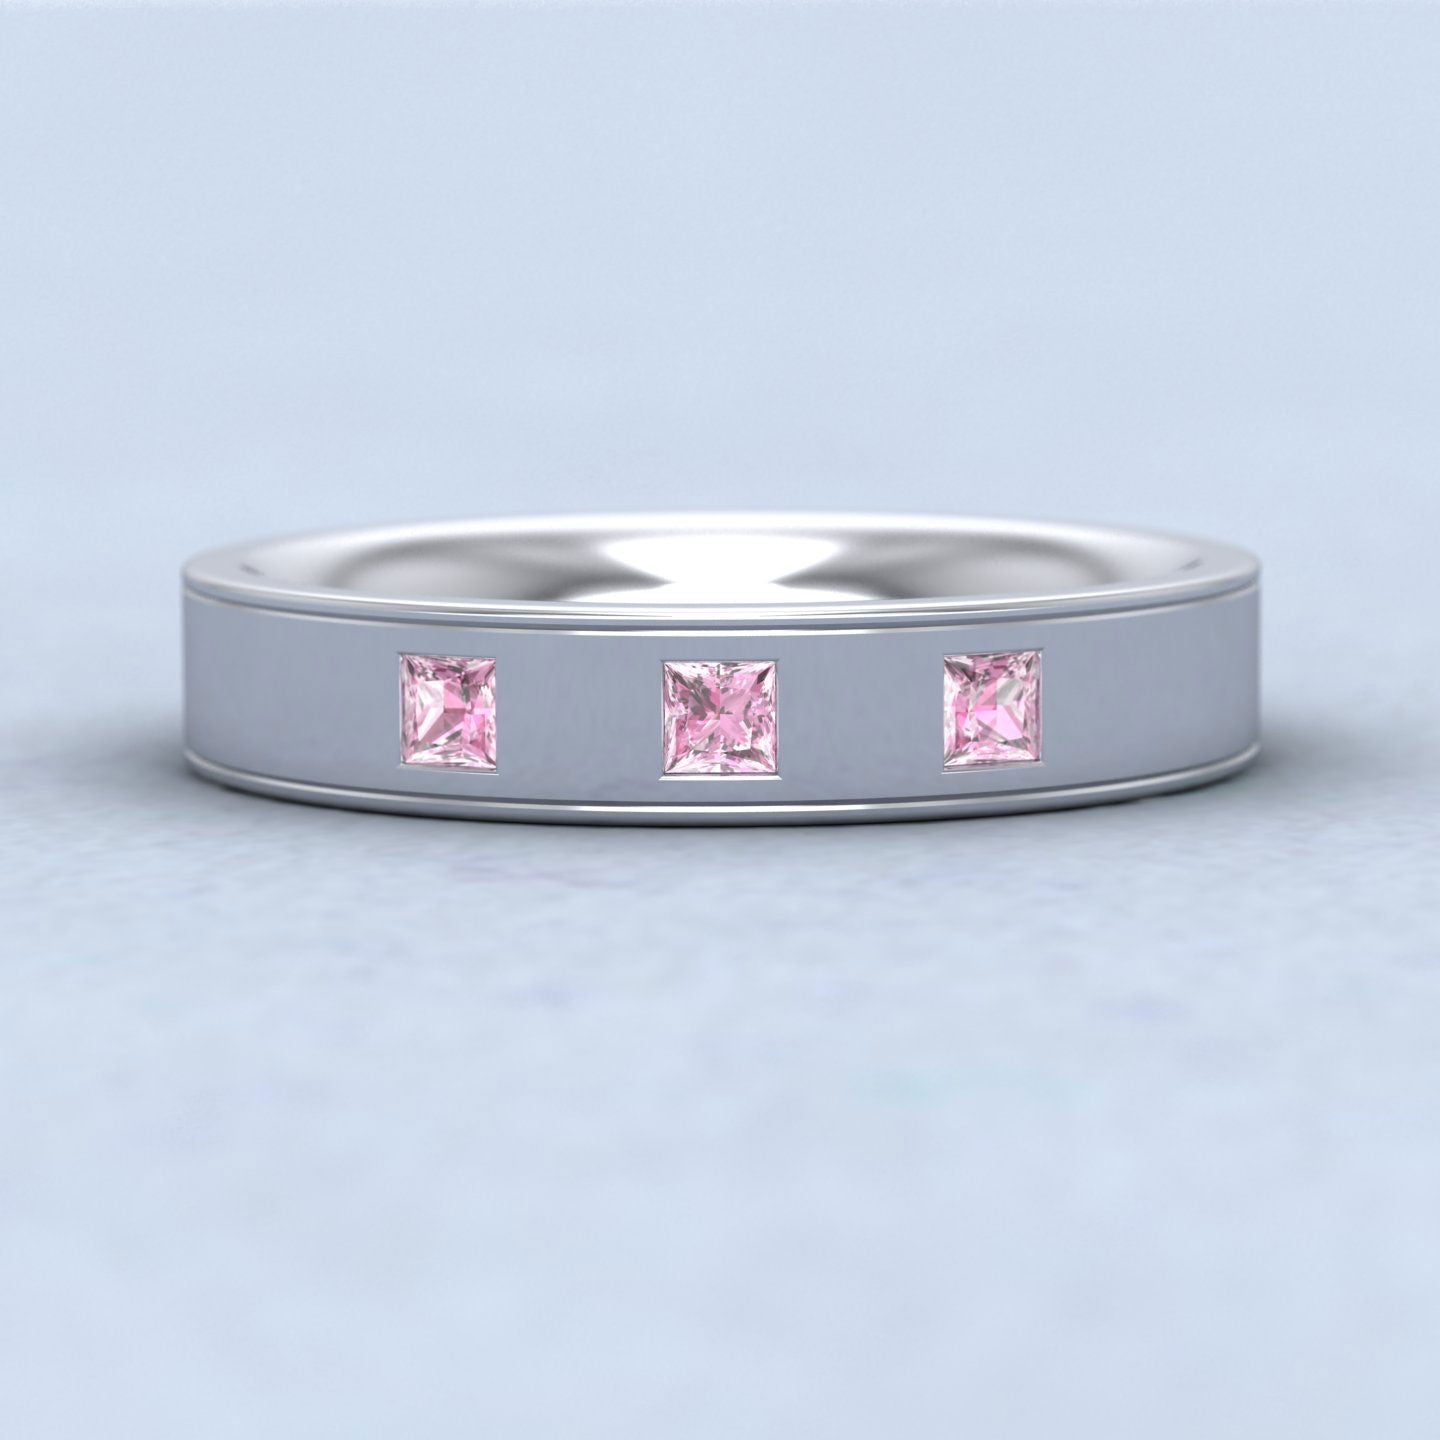 Princess Cut Pink Sapphire And Line Patterned 9ct White Gold 4mm Wedding Ring